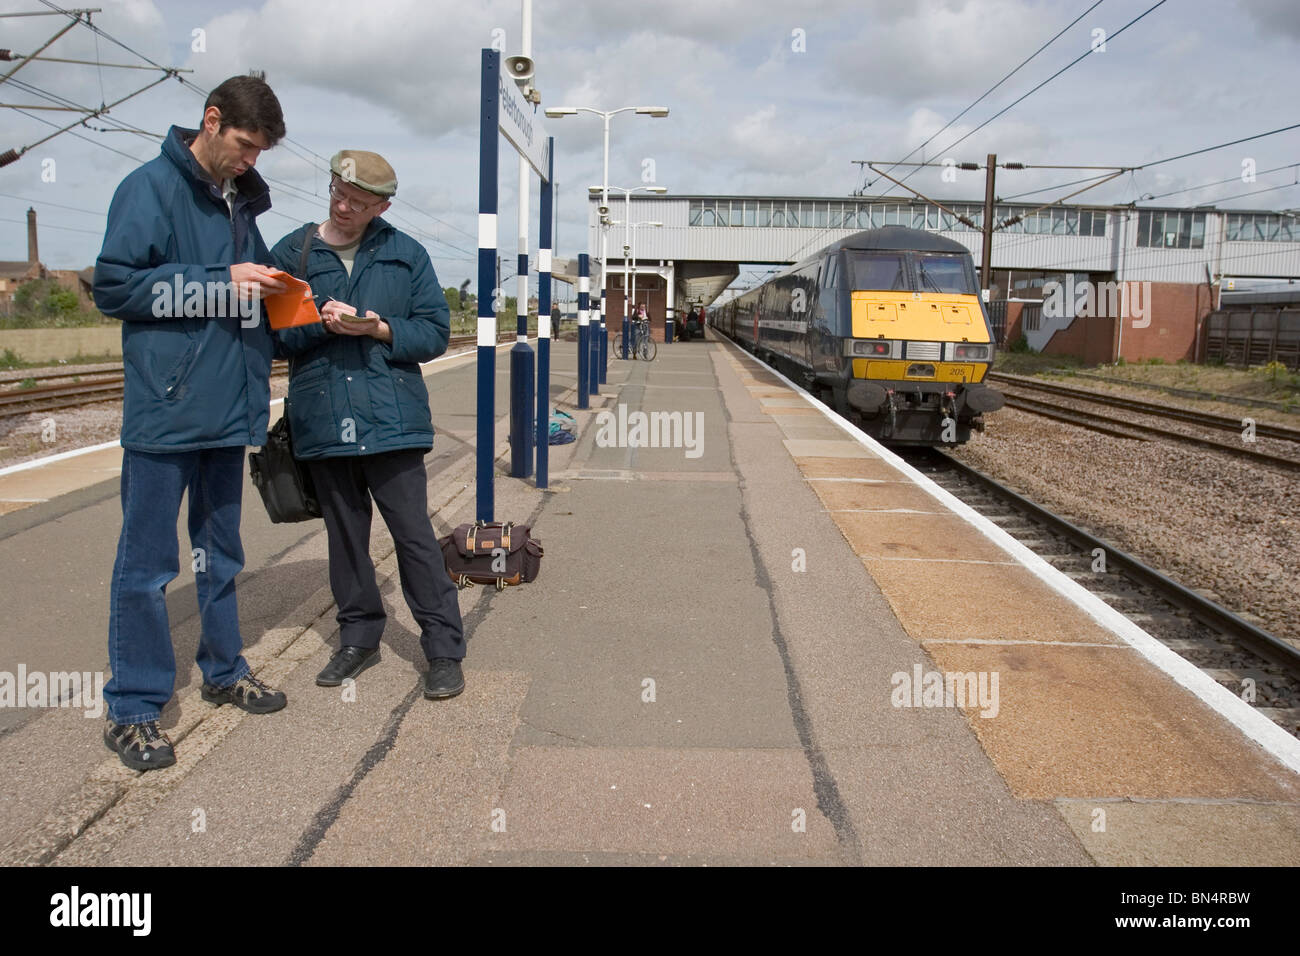 Trainspotters comparing notes on a platform at Peterborough Station. Stock Photo